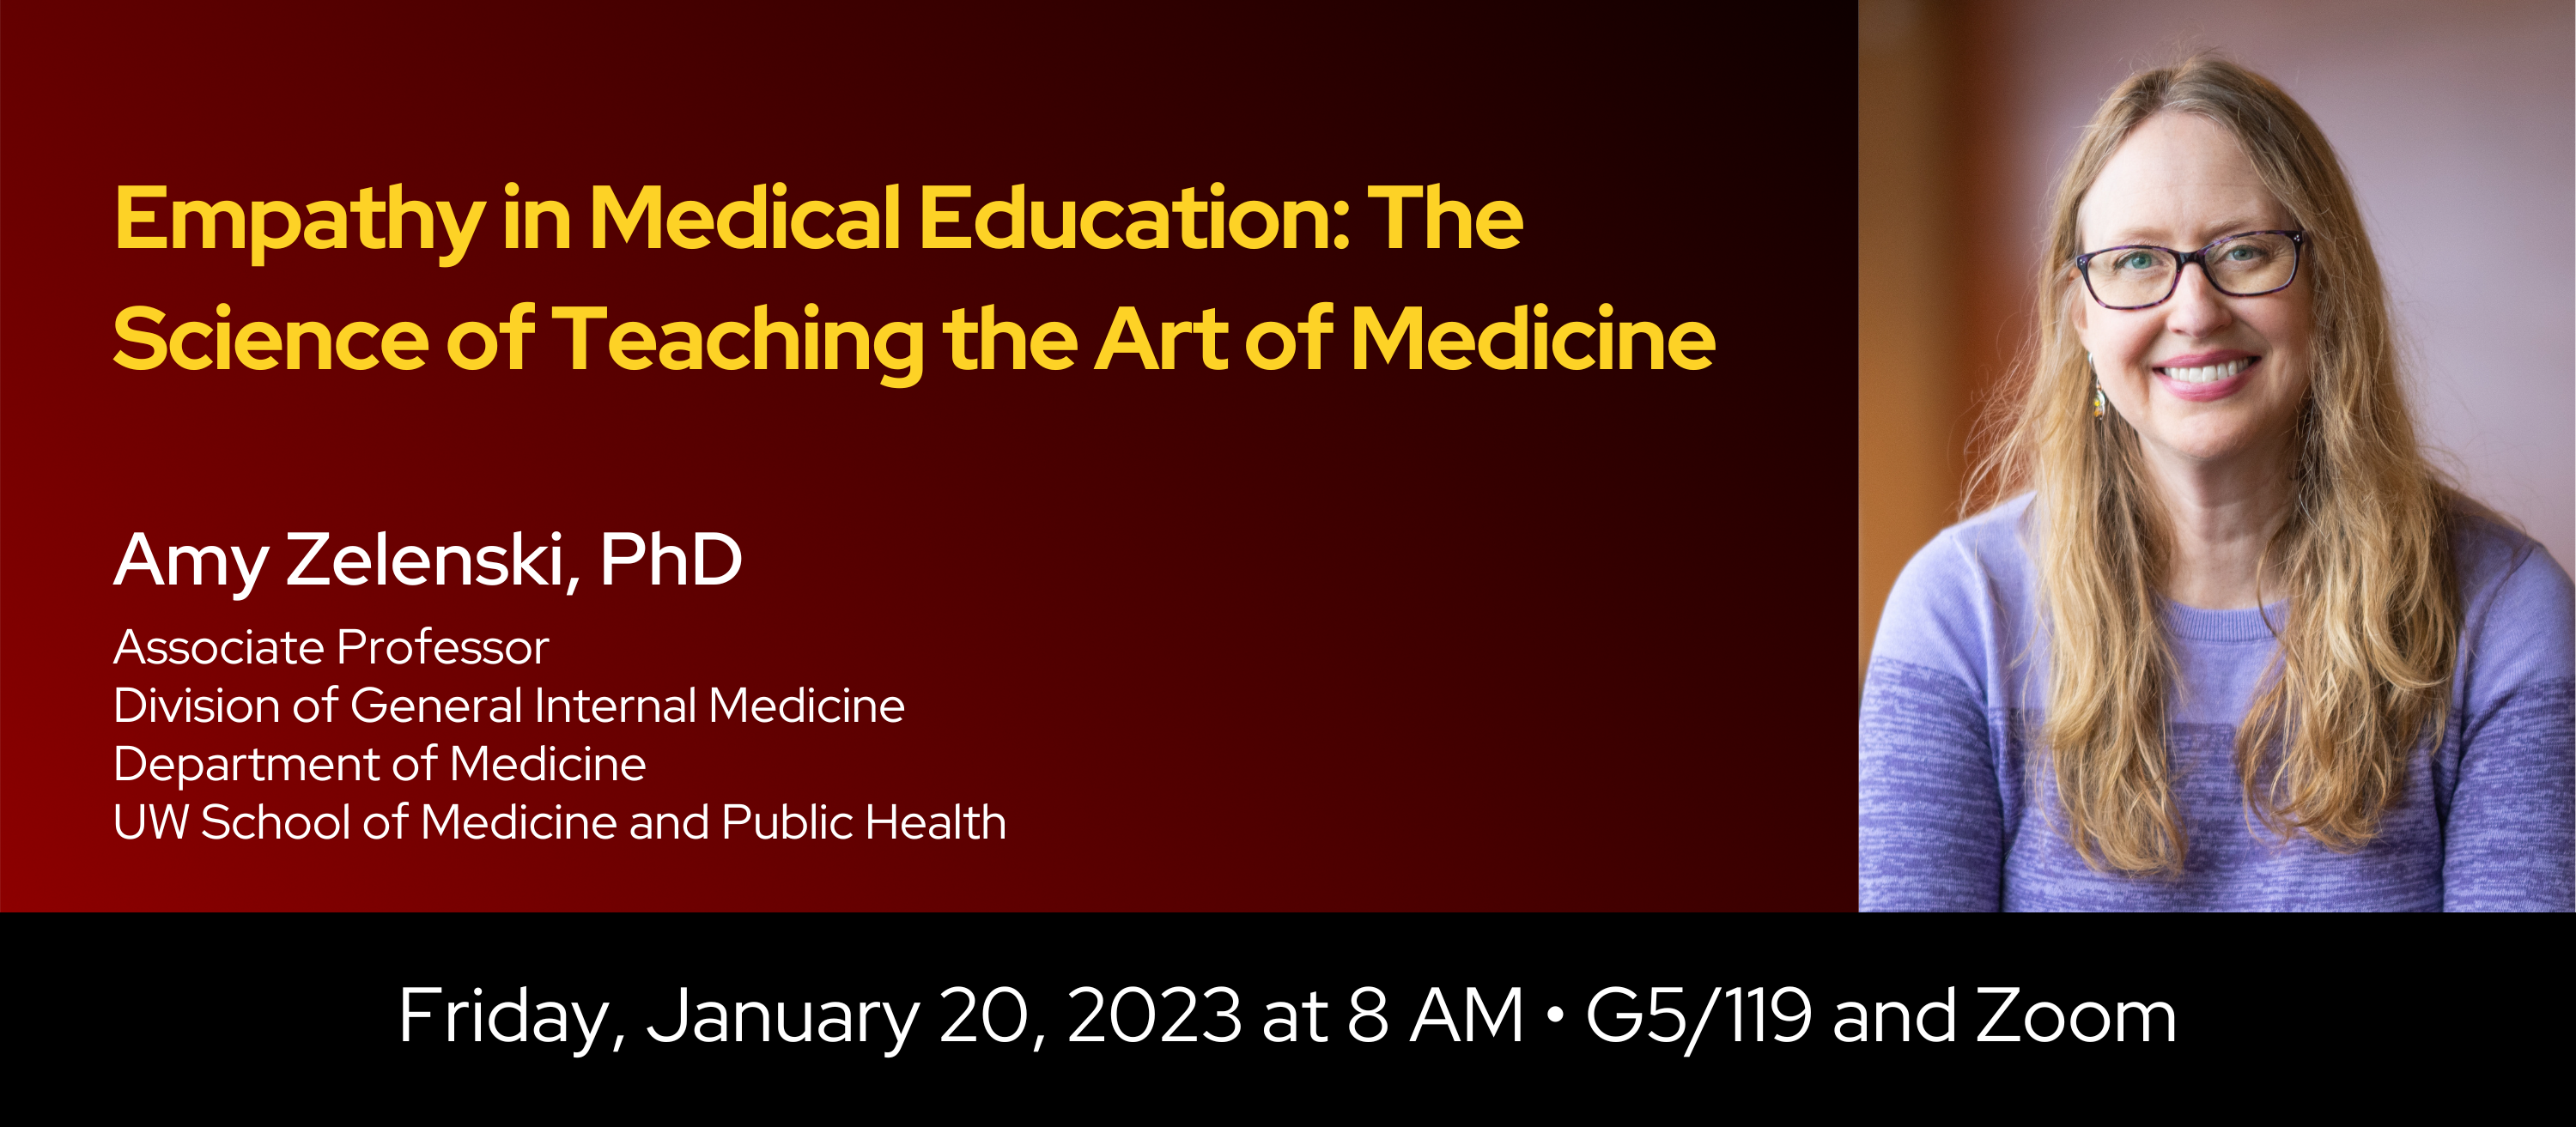 Title: Empathy in Medical Education: The Science of Teaching the Art of Medicine